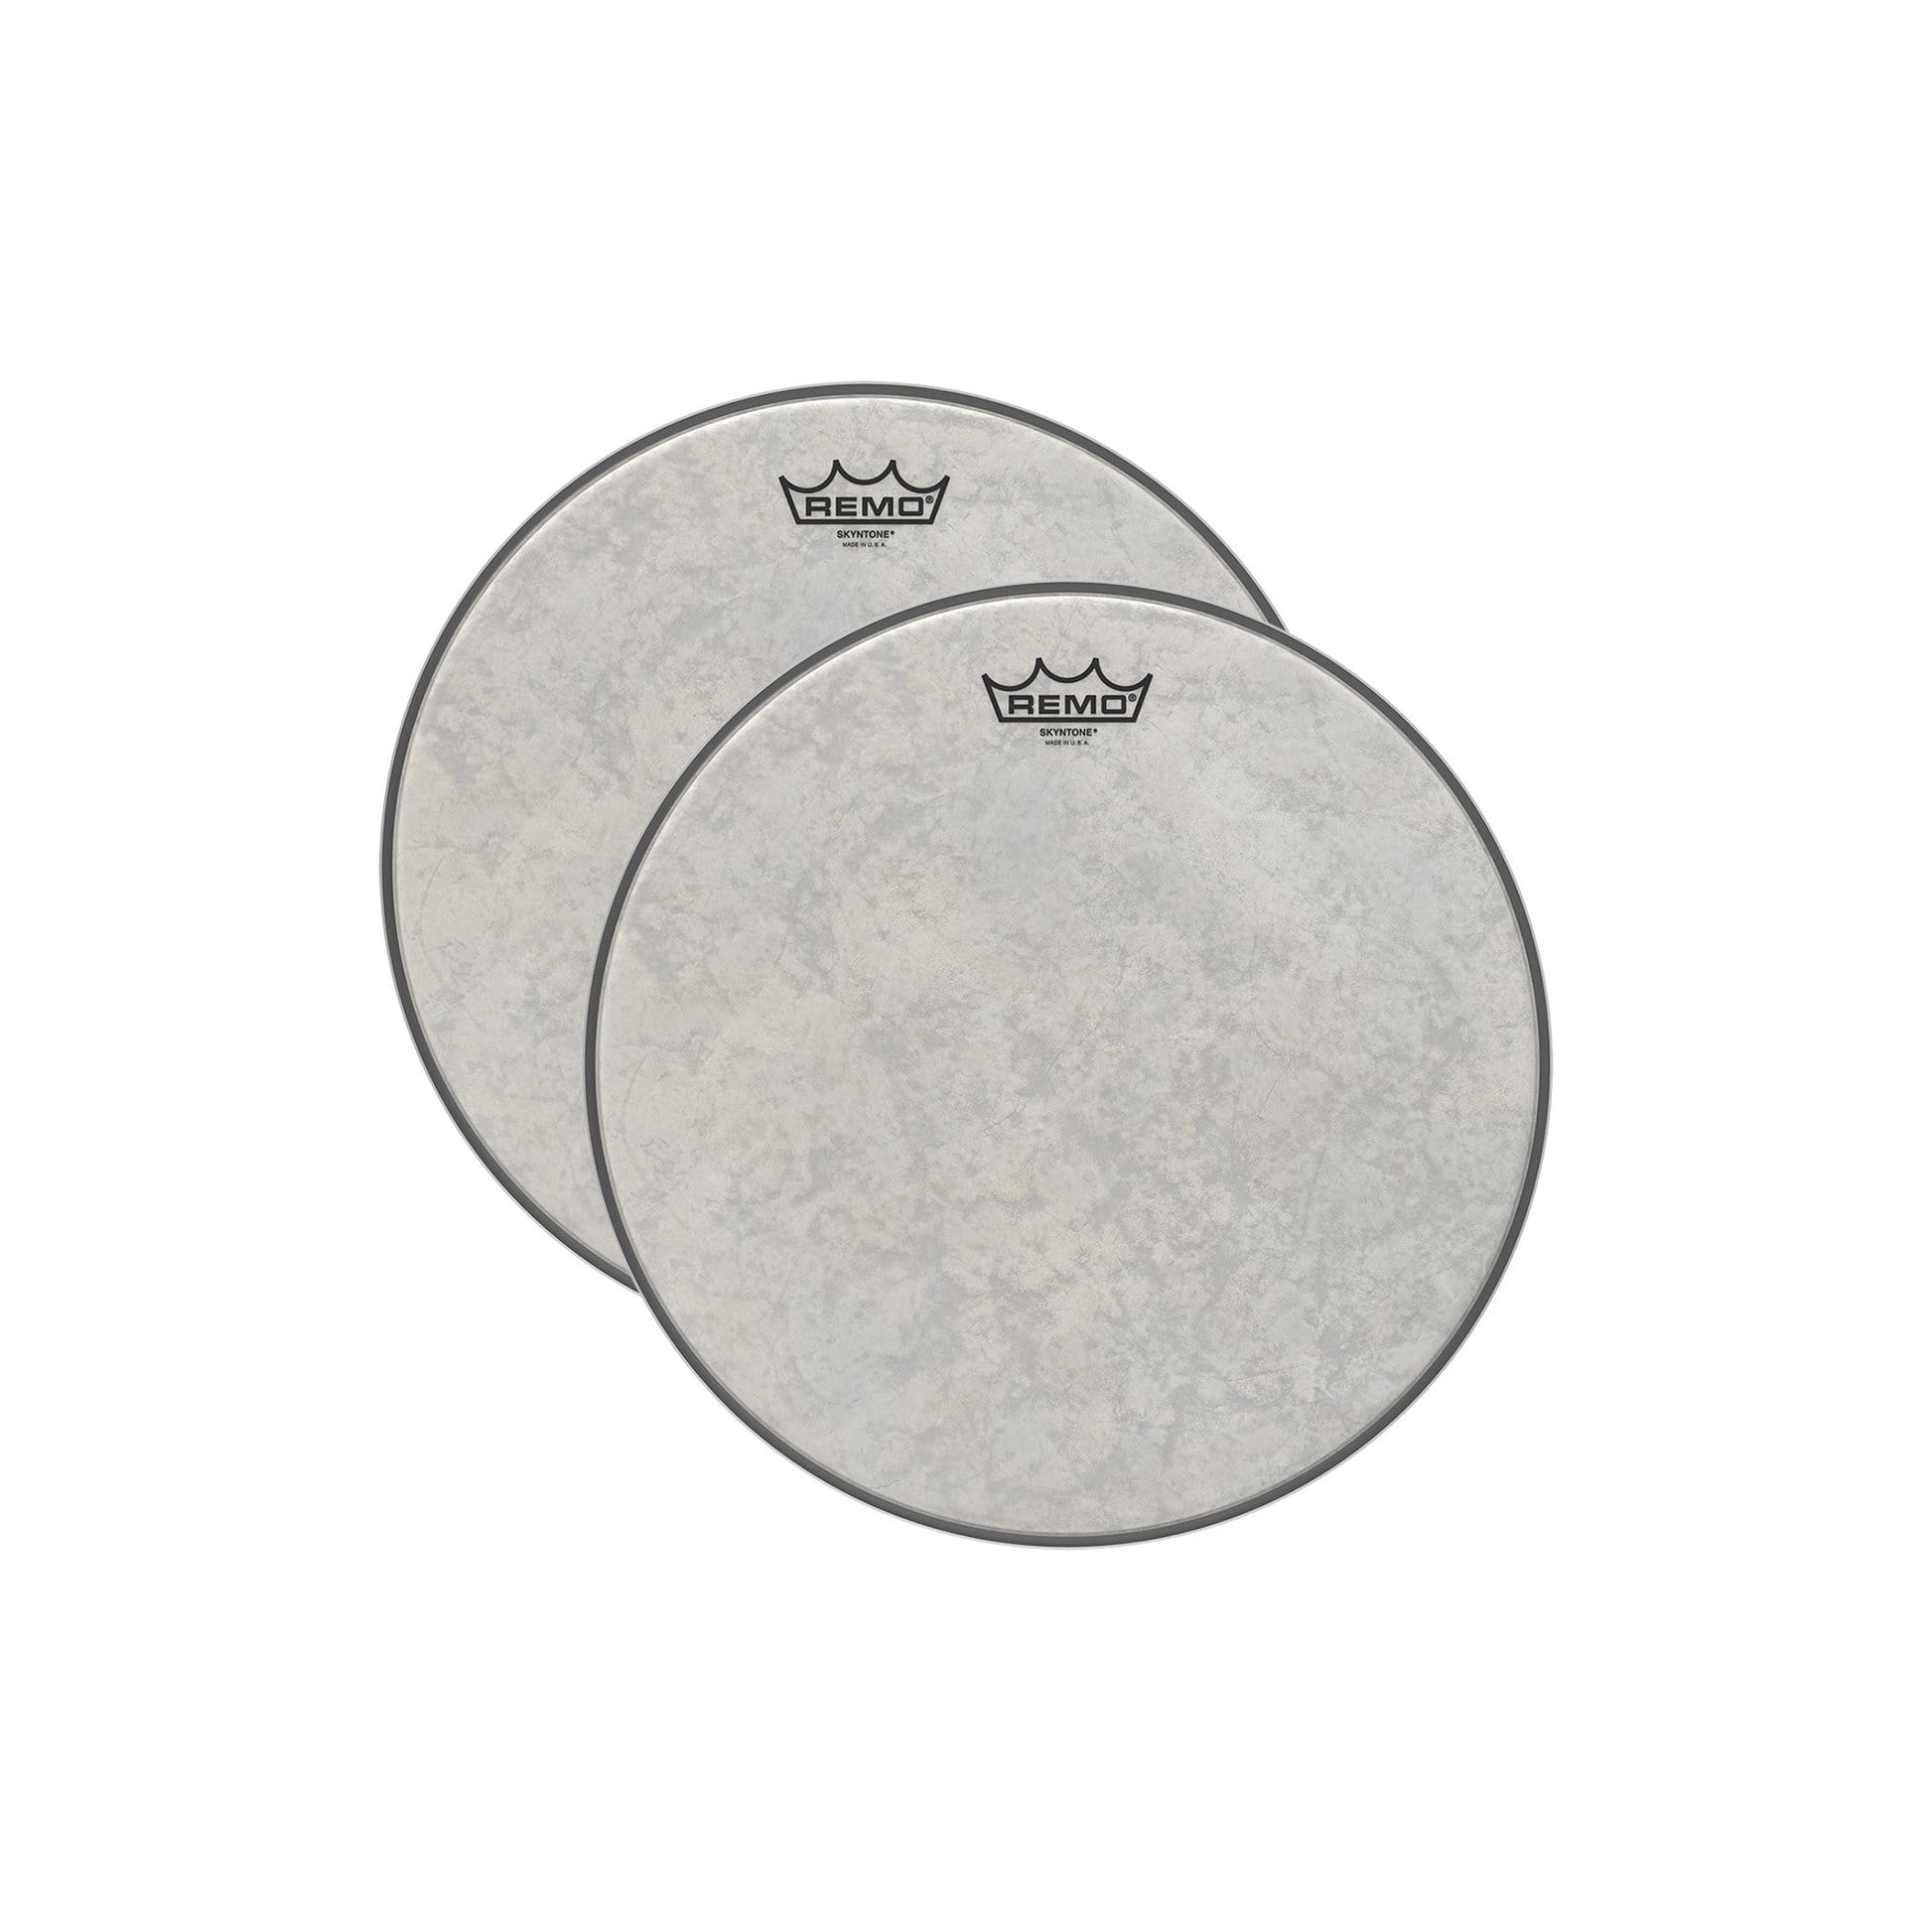 Remo 12" Diplomat Skyntone Drumhead (2 Pack Bundle) Drums and Percussion / Parts and Accessories / Heads